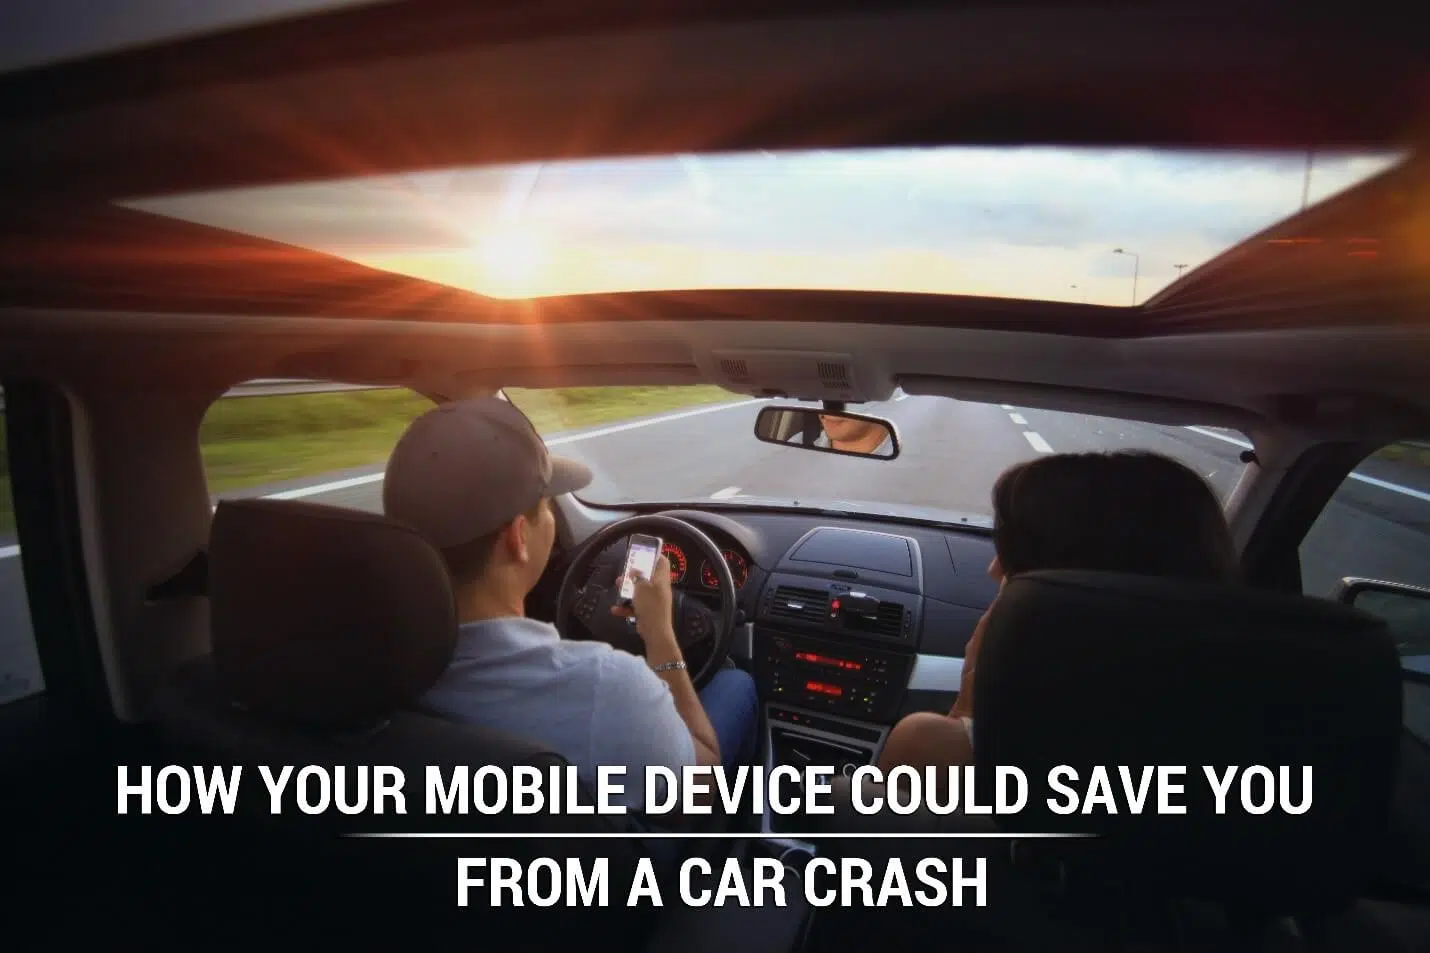 How Your Mobile Device Could Save You from a Car Crash